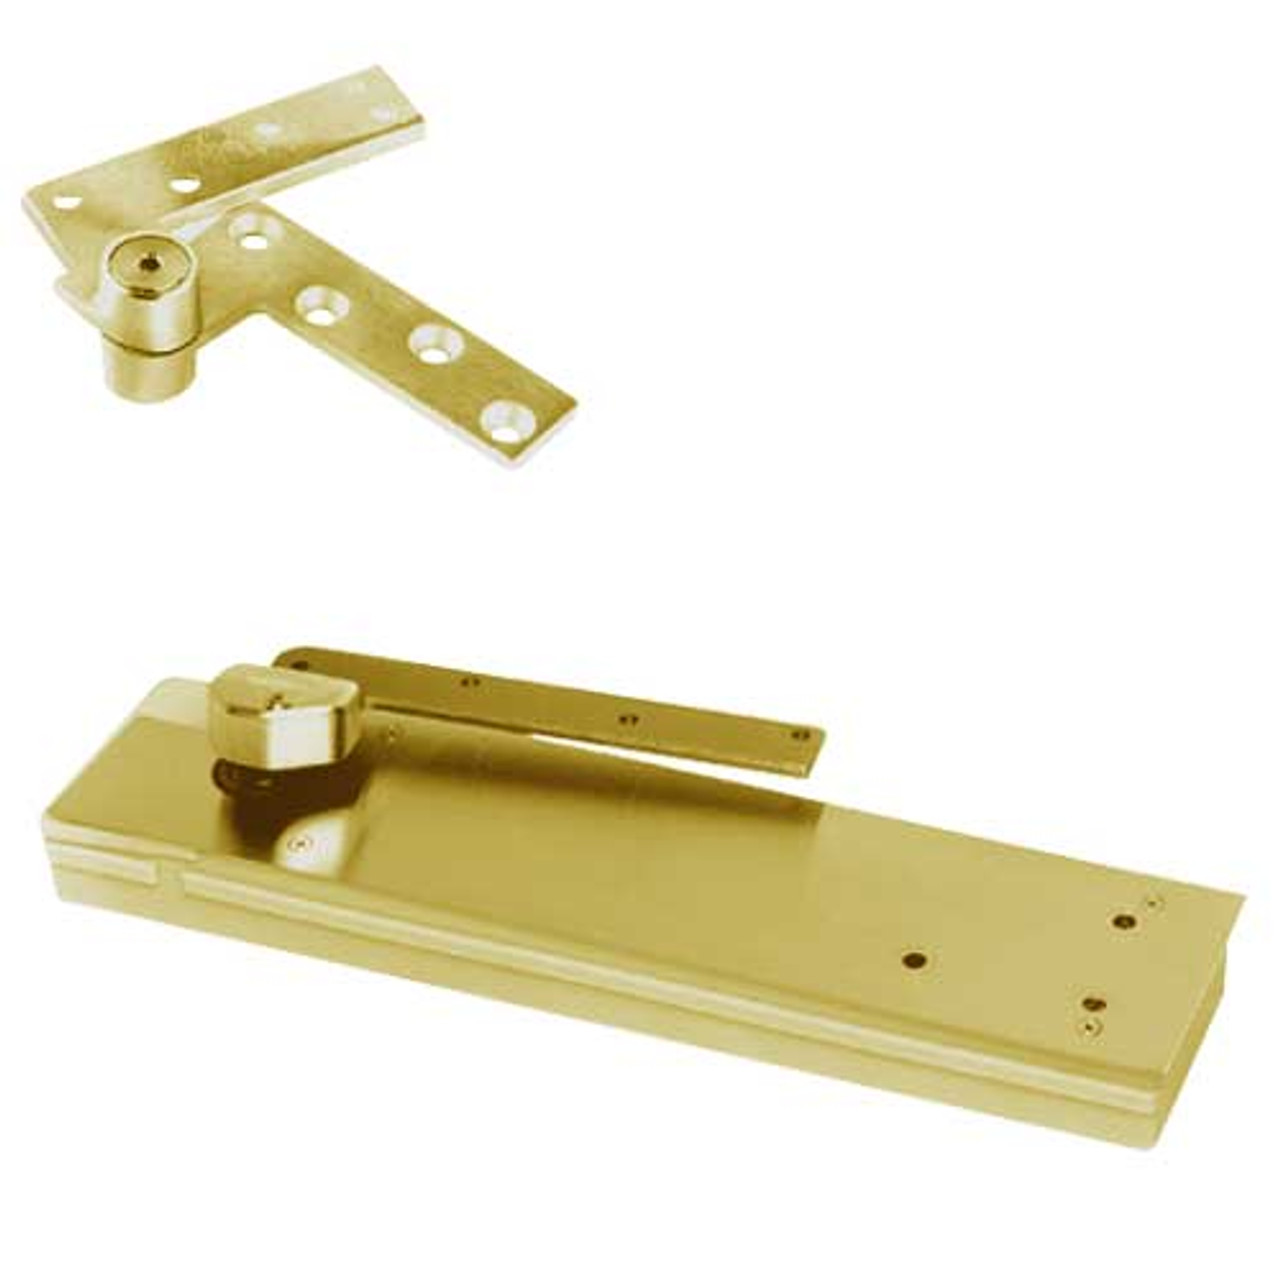 5105ABC105-1-1/2OS-LCC-LH-606 Rixson 51 Series 1-1/2" Offset Hung Shallow Depth Floor Closers in Satin Brass Finish